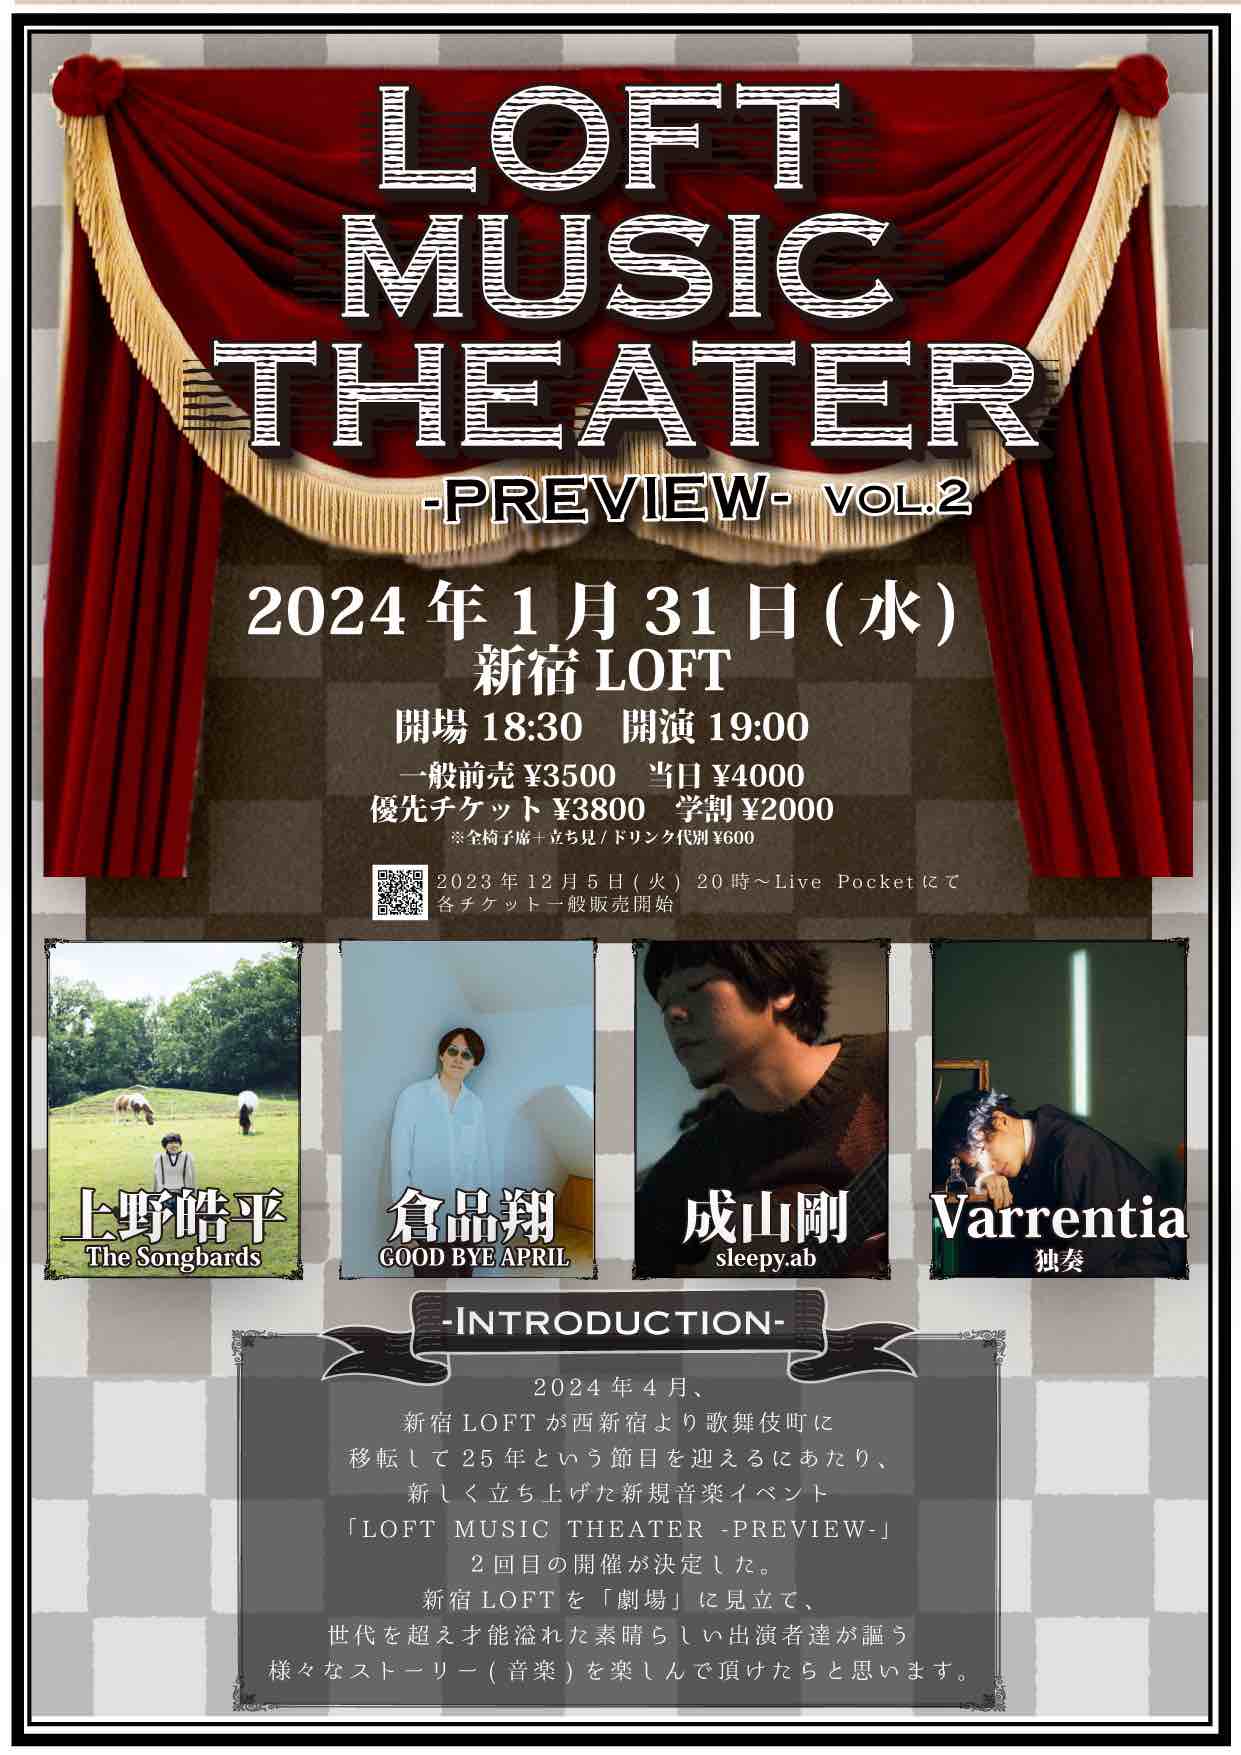 LOFT MUSIC THEATER -PREVIEW- vol.2